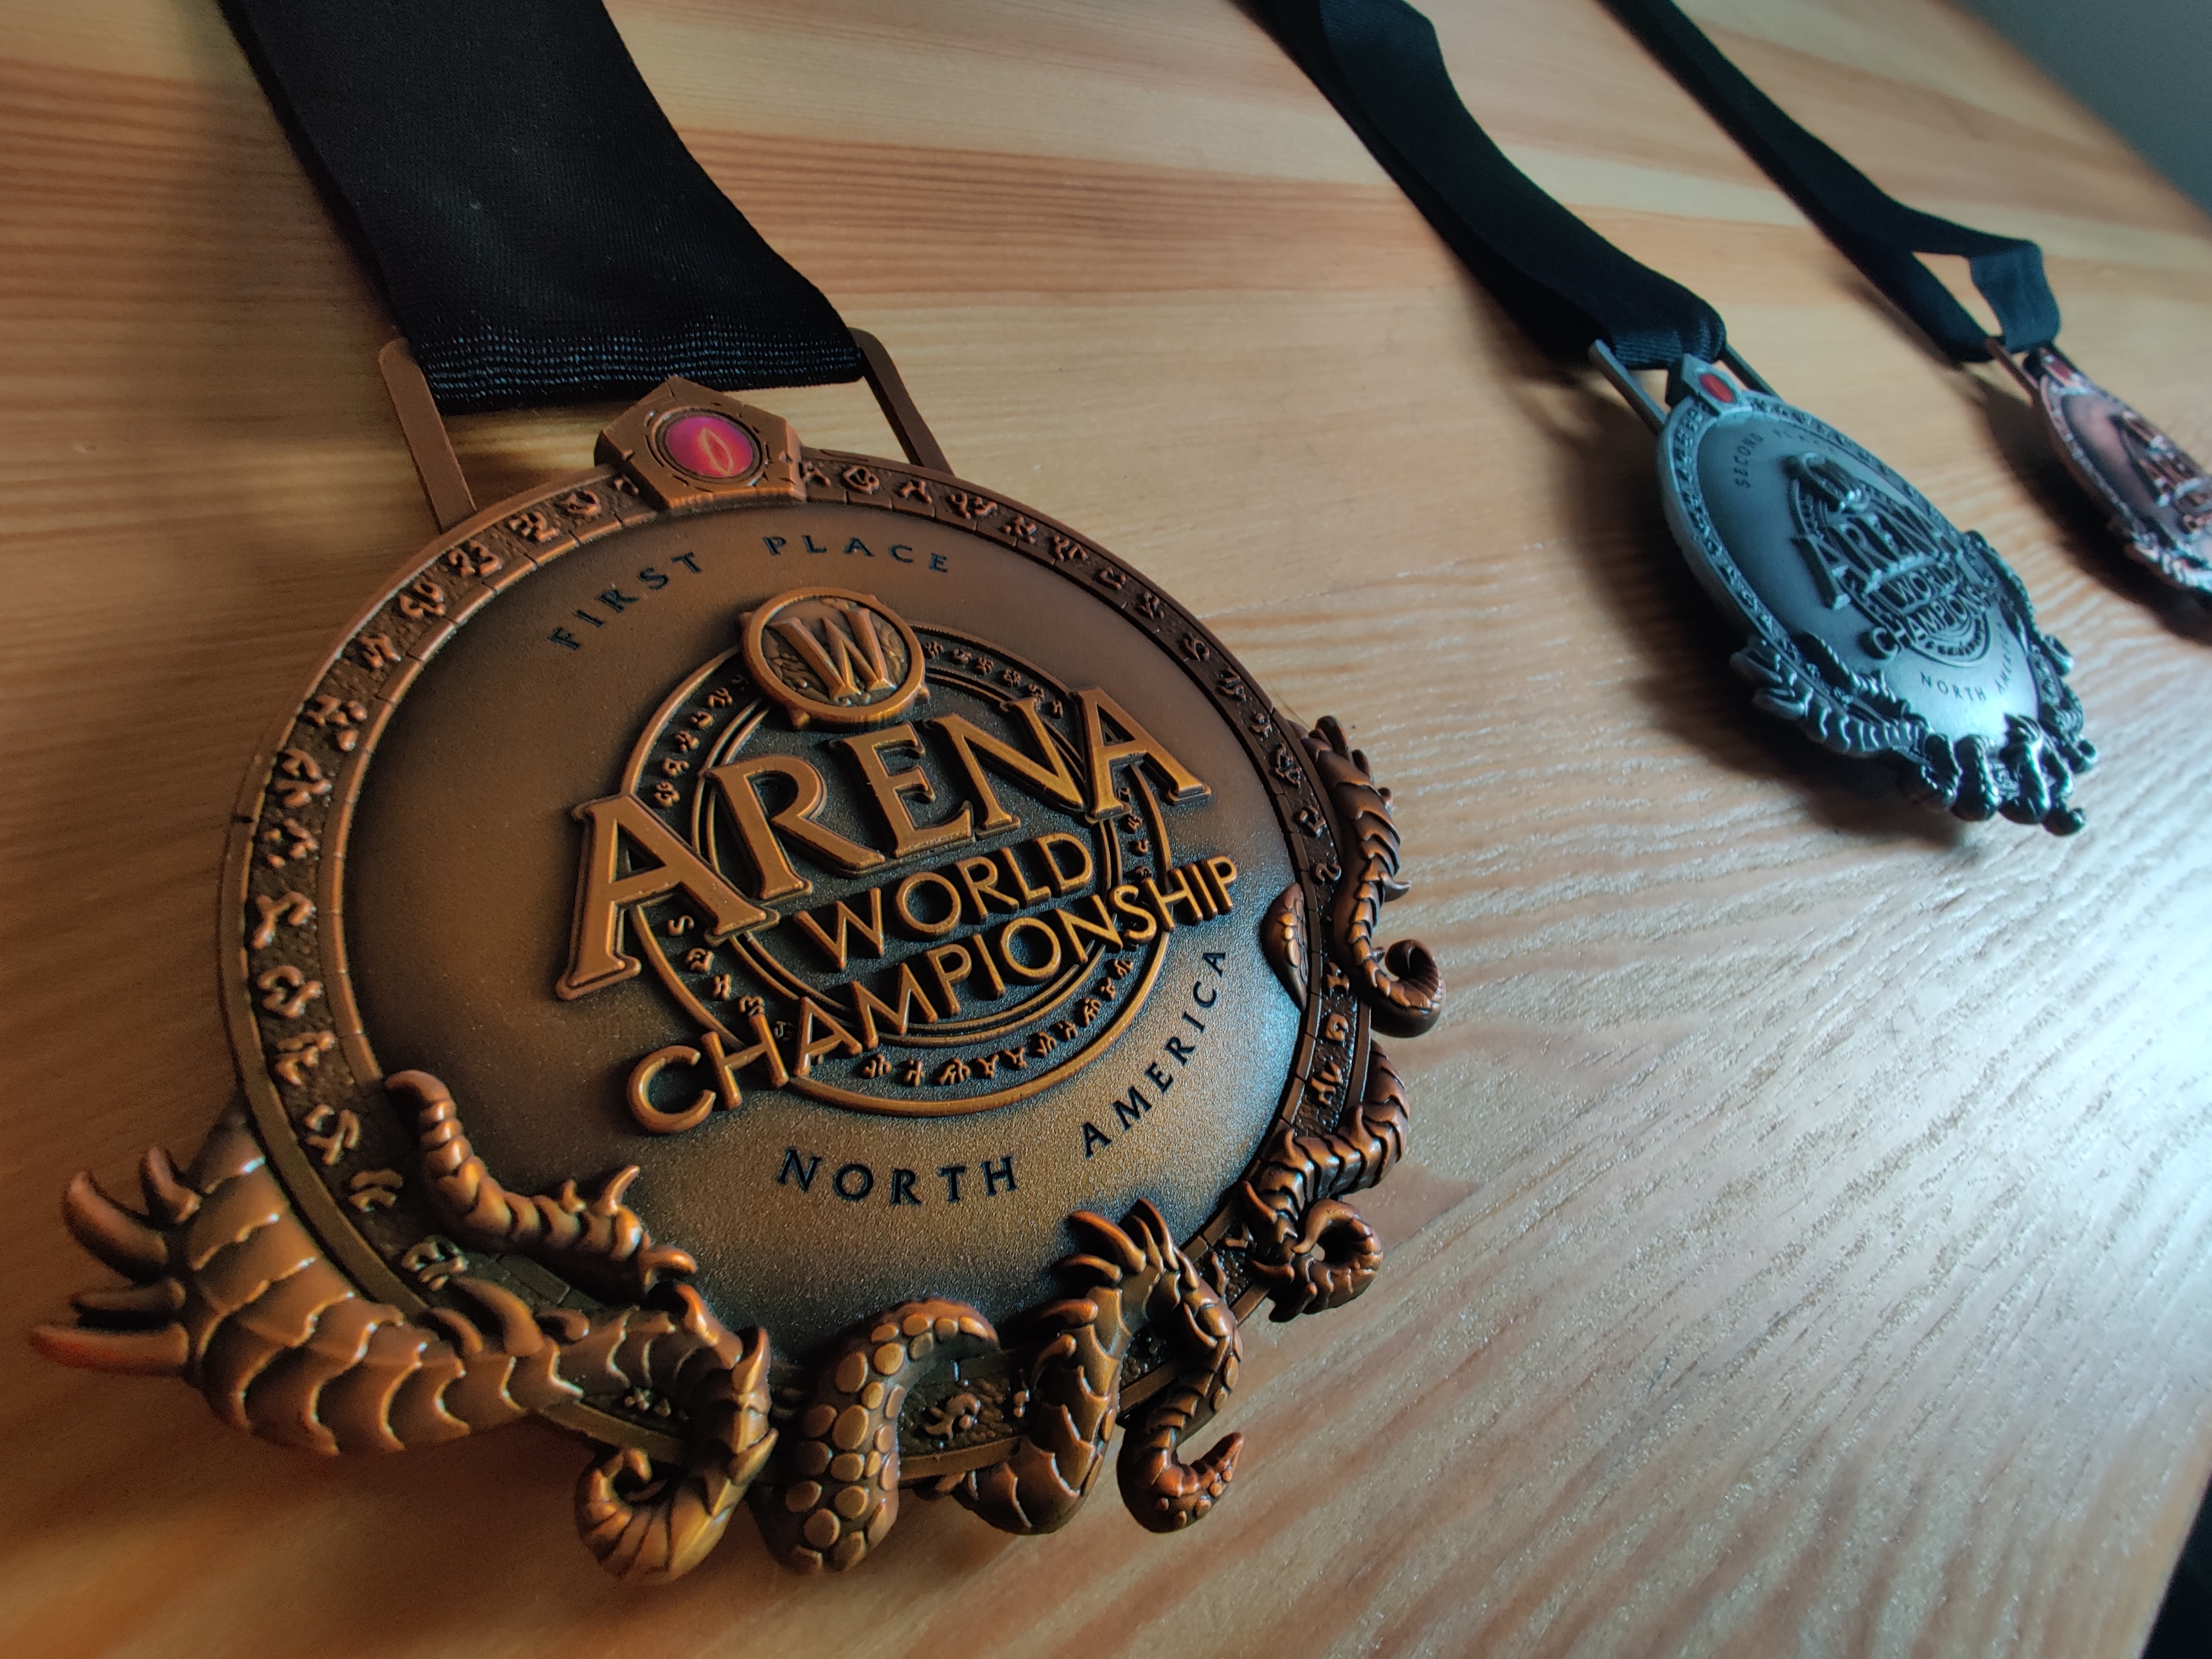 Meet the AWC Battle for Azeroth Regional Champions!